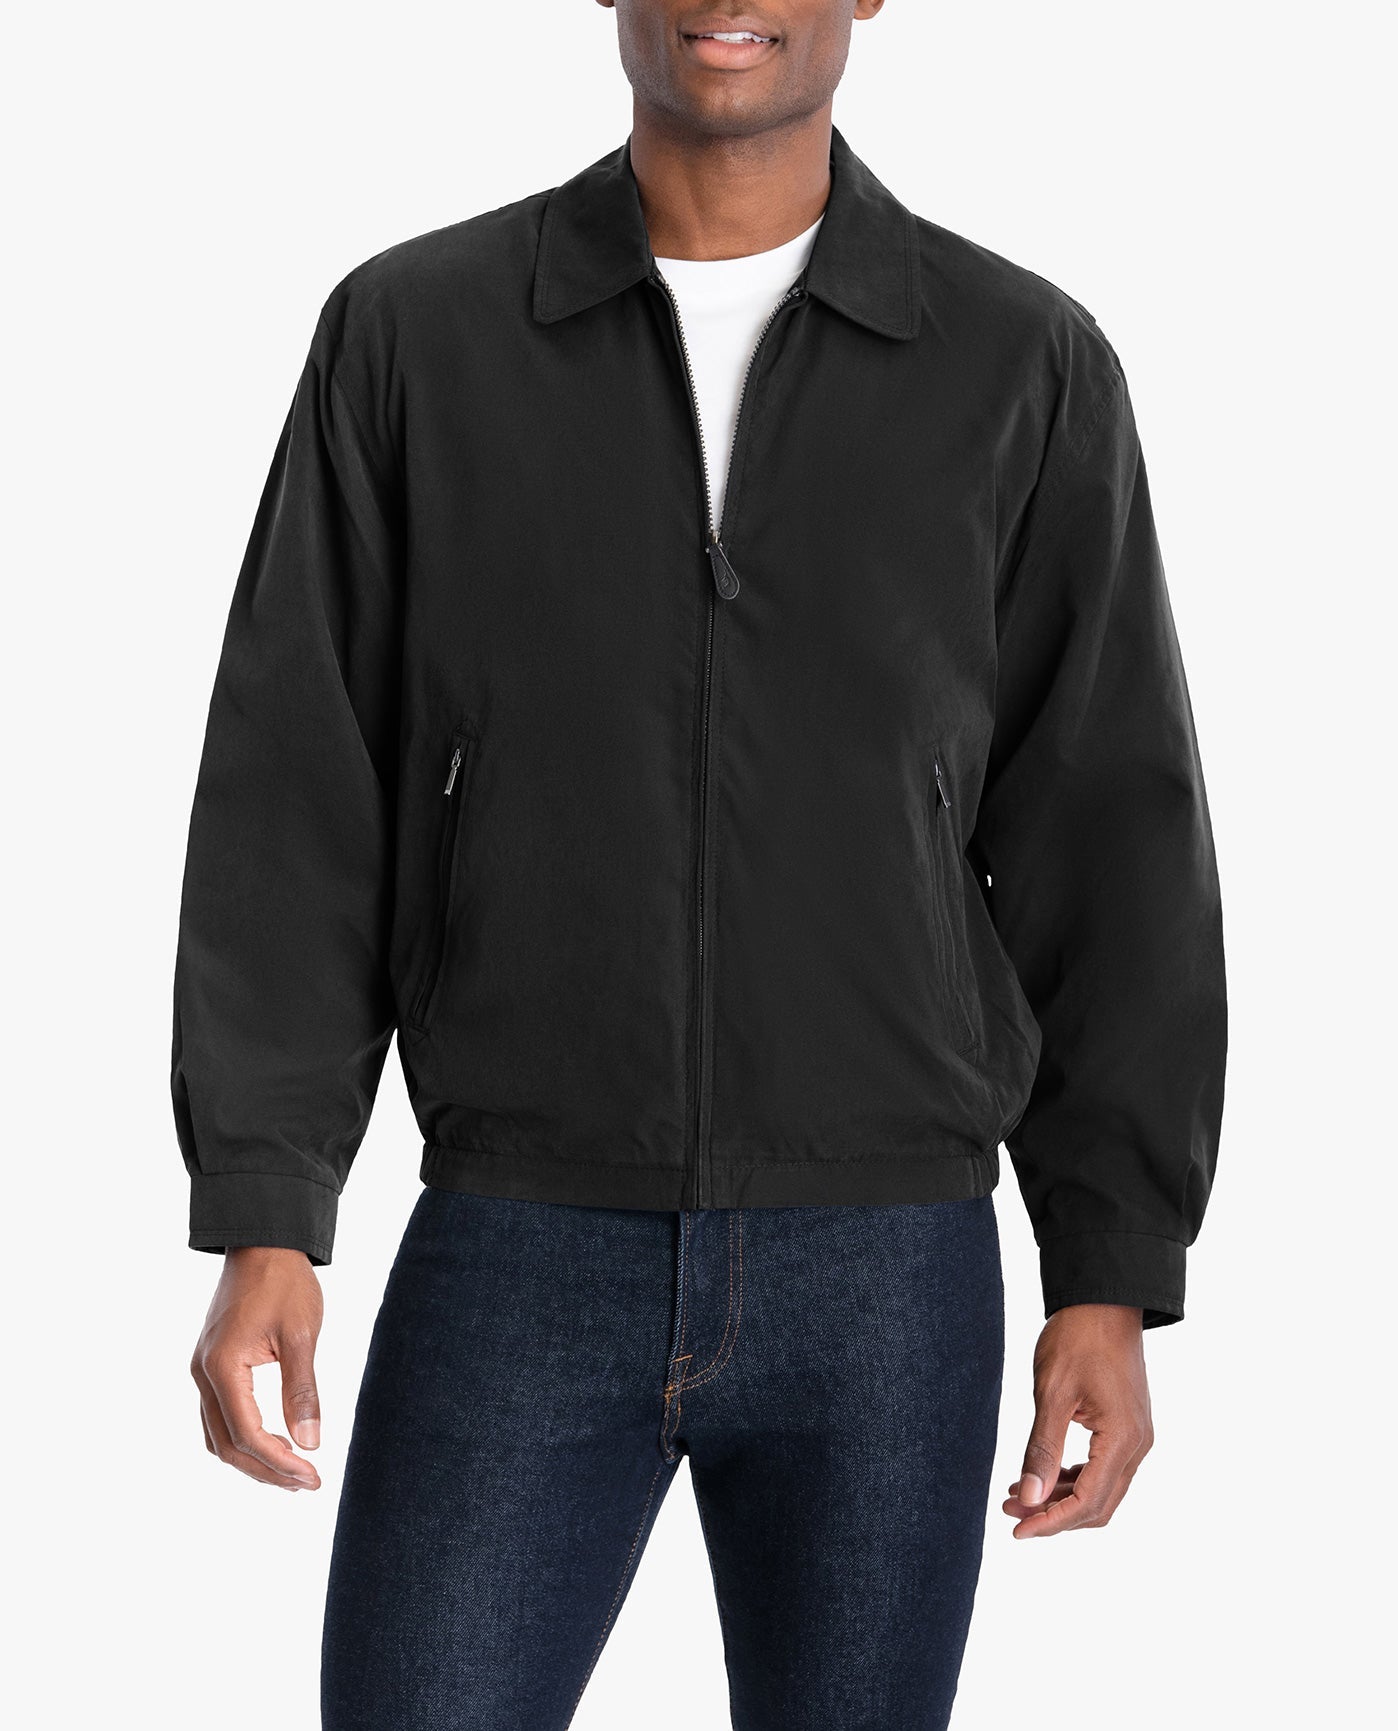 FRONT VIEW OF EXTENDED LIGHT WEIGHT ZIP FRONT GOLF JACKET | BLACK